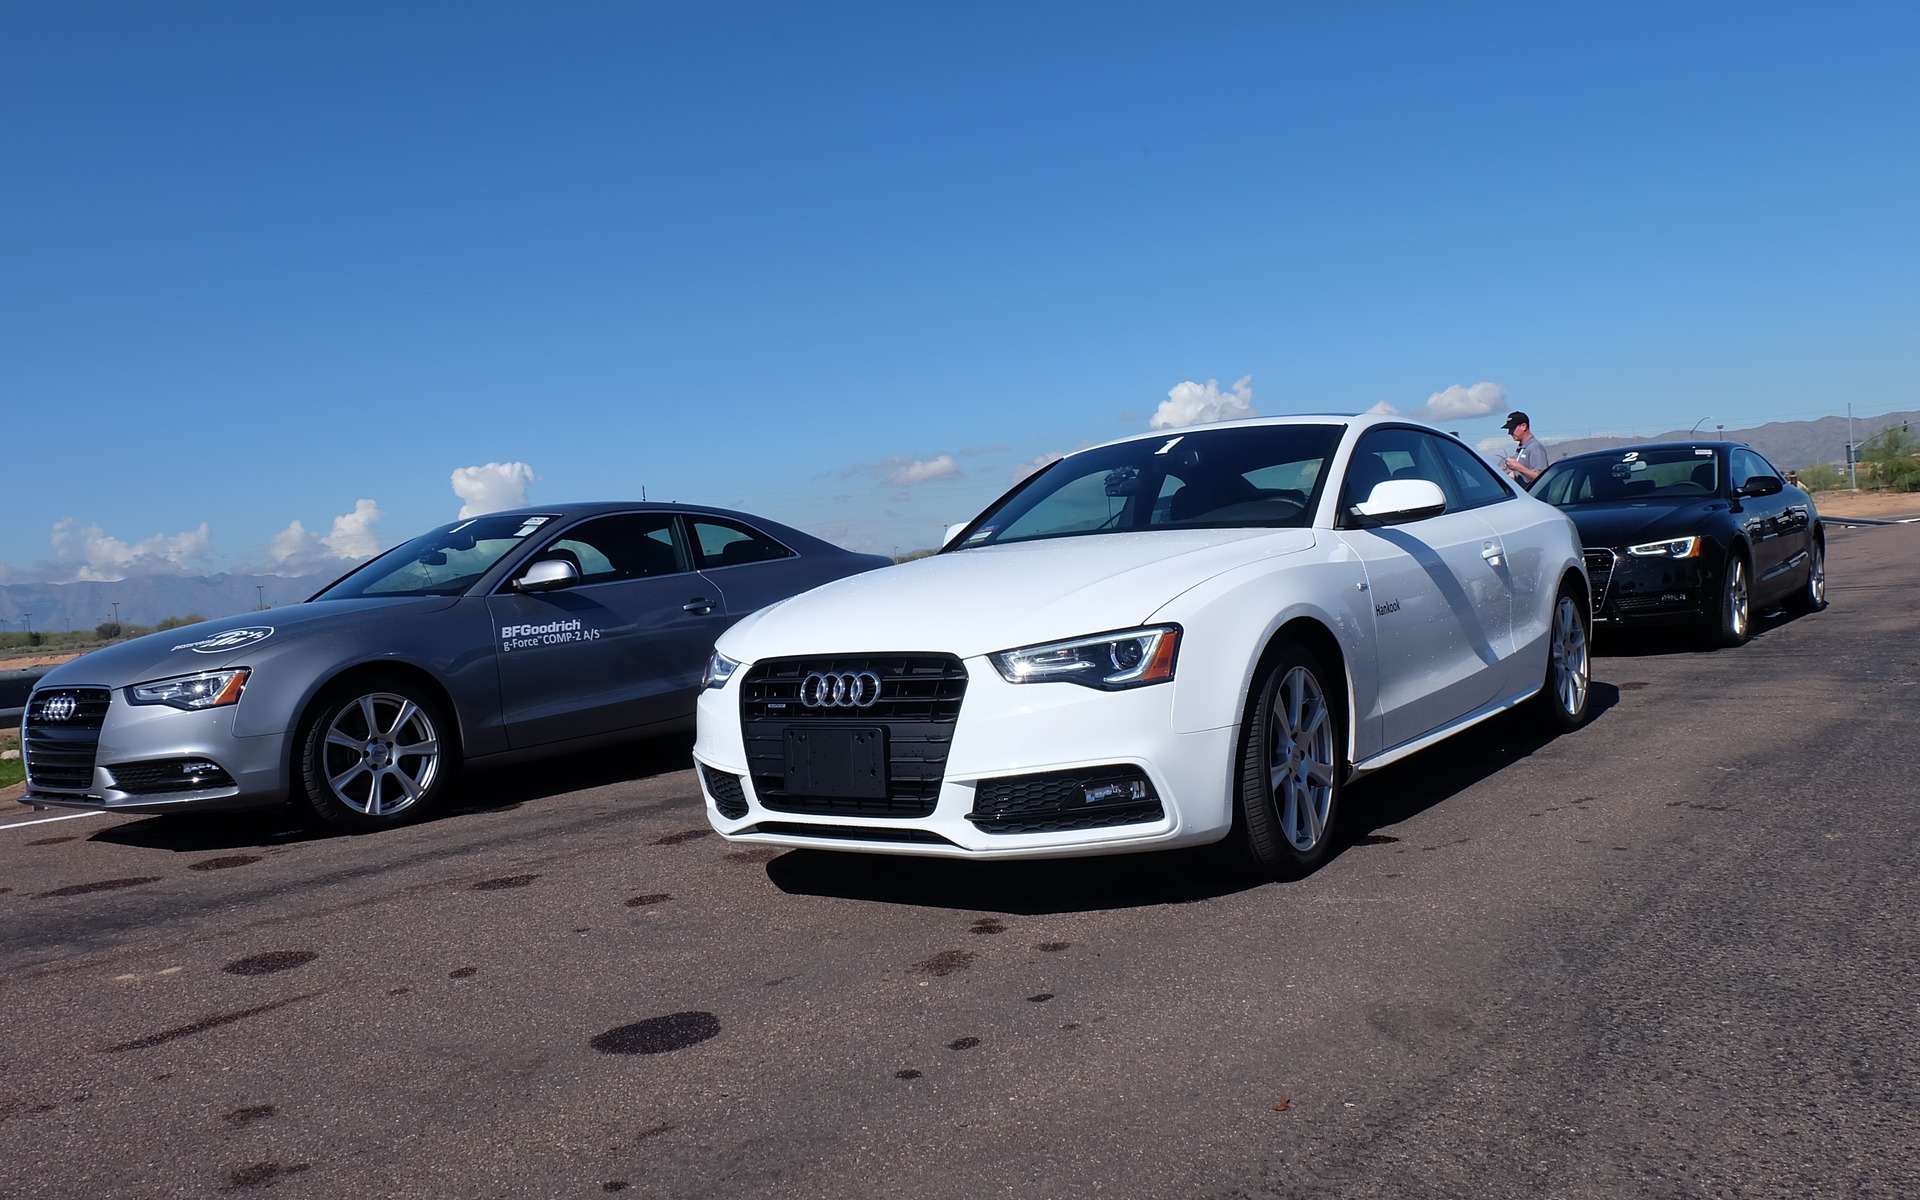 A fleet of Audi A5s were left at our disposal for the test.